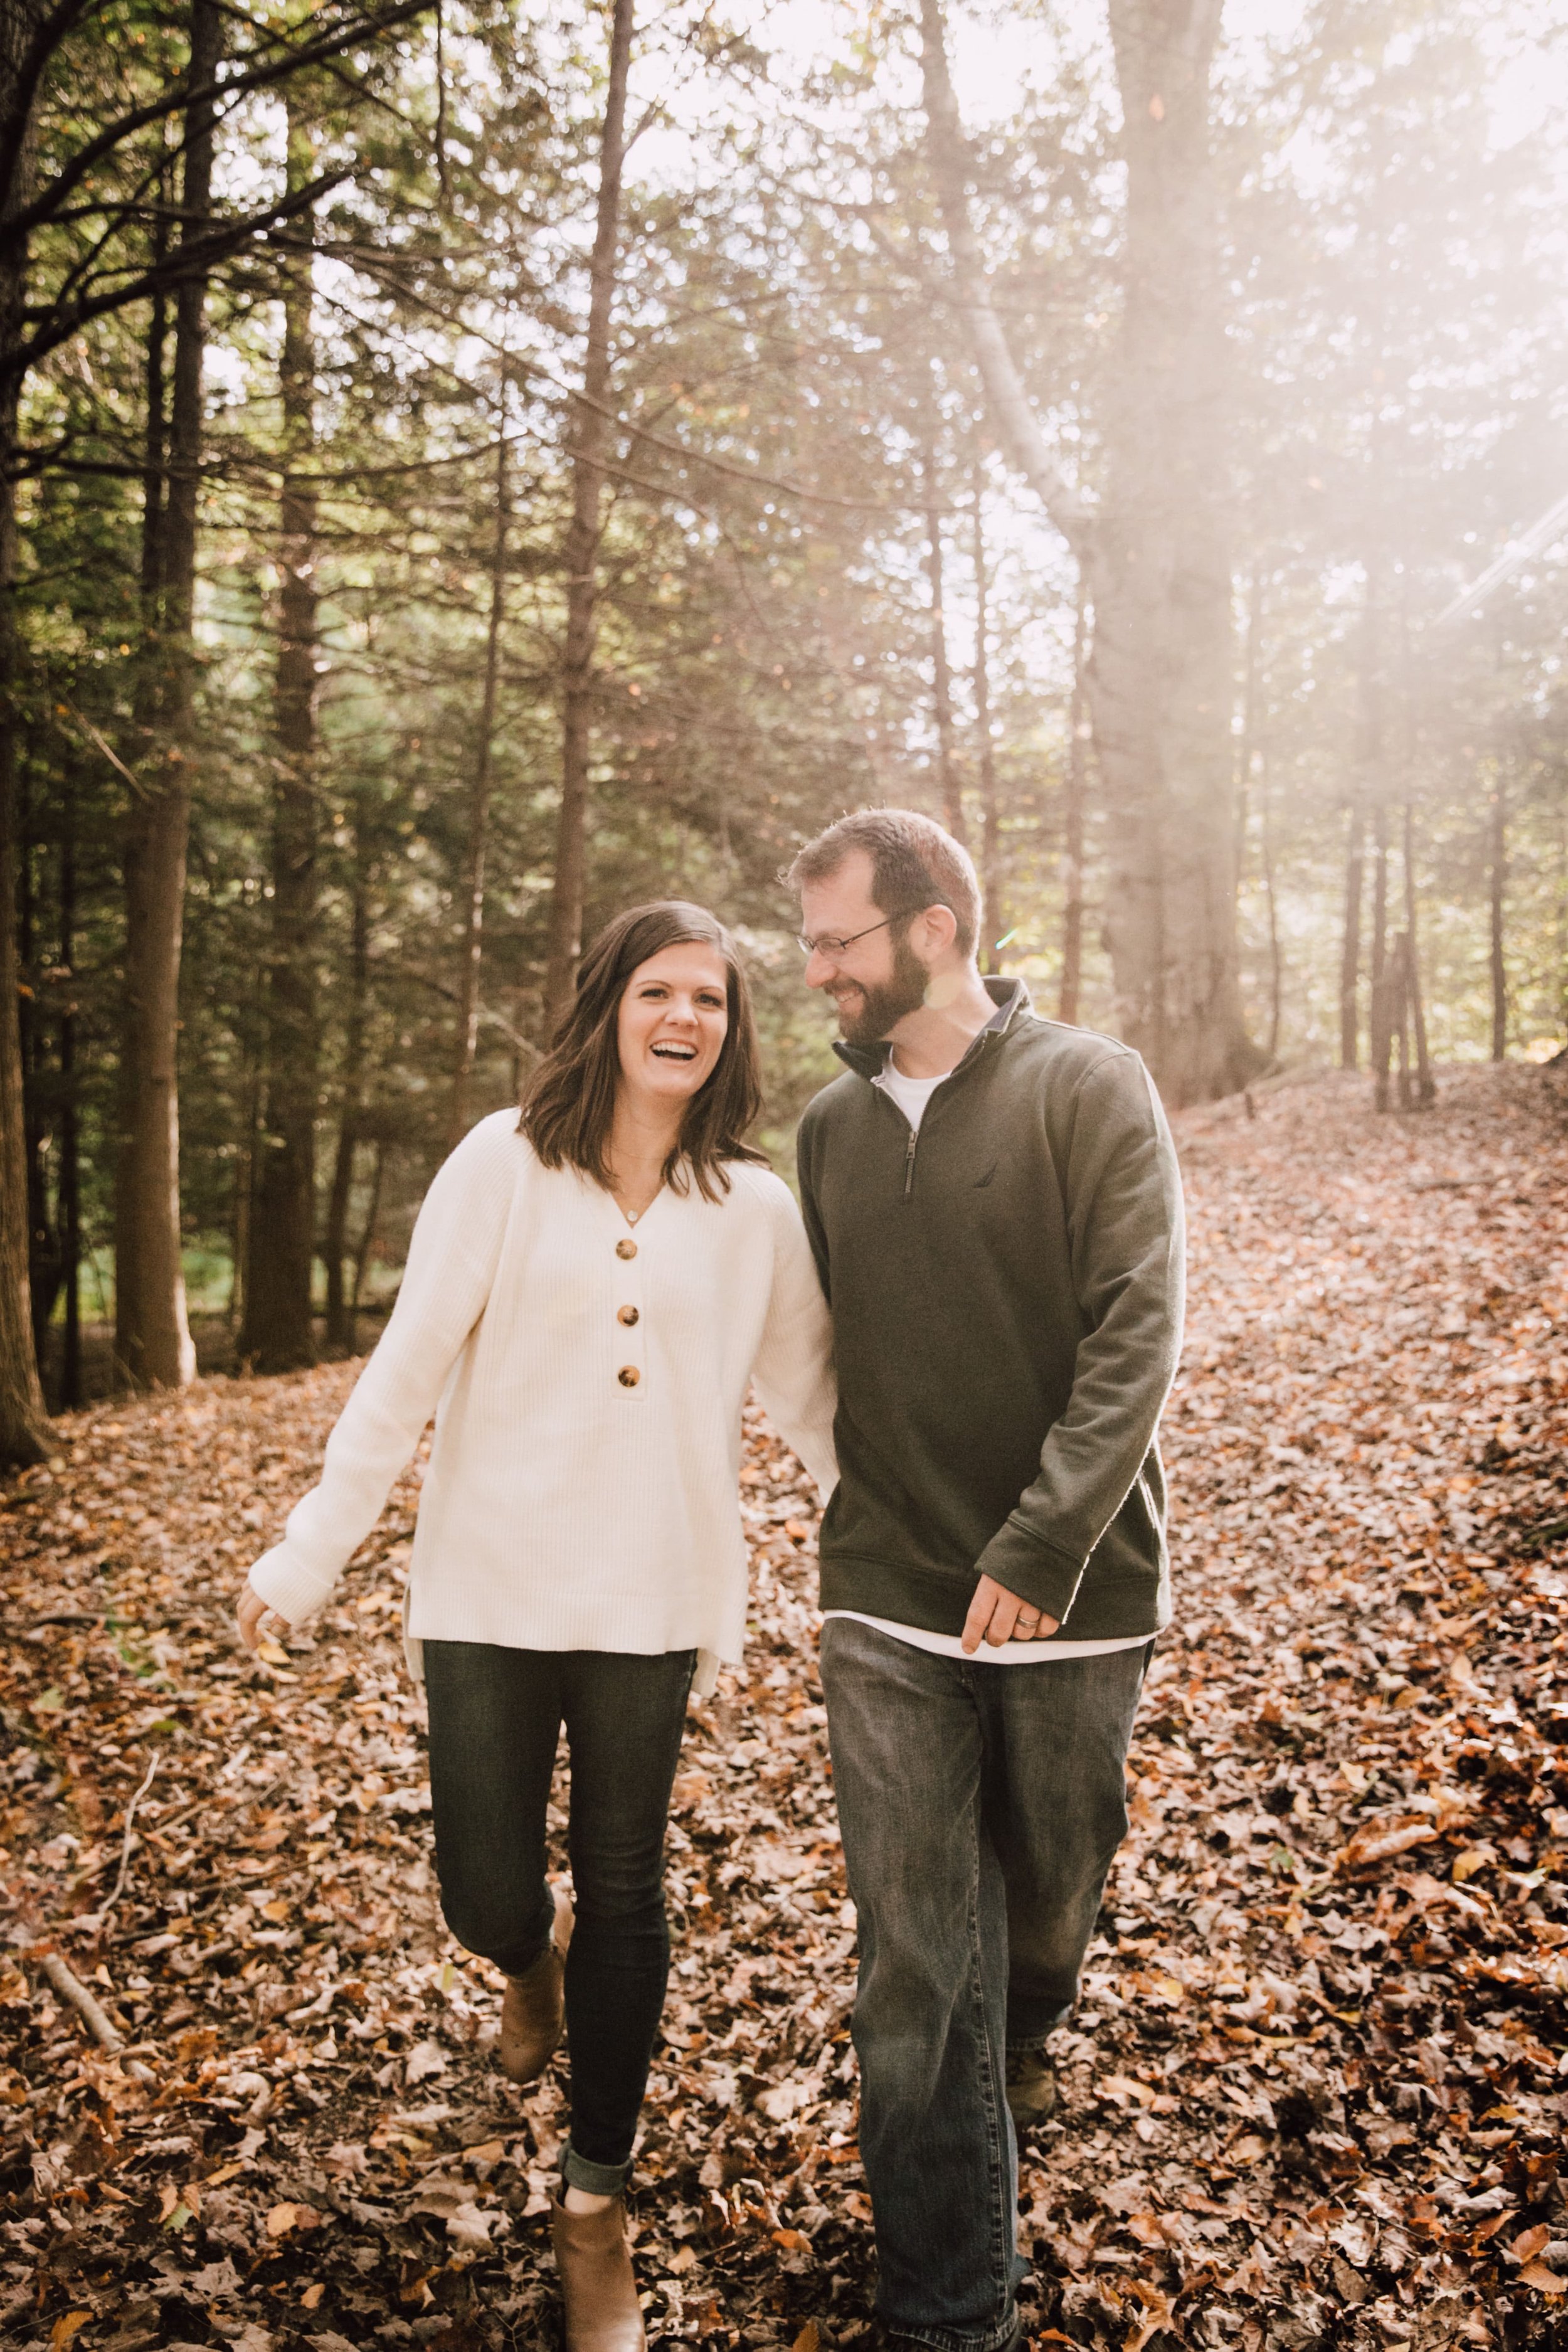  megan and barrett’s fall engagement photos to celebrate their wedding they walk together through a wooded area while smiling megan wears a white waffle knit sweater with jean and brown boots and barrett wears an olive green quarter zip with jeans an